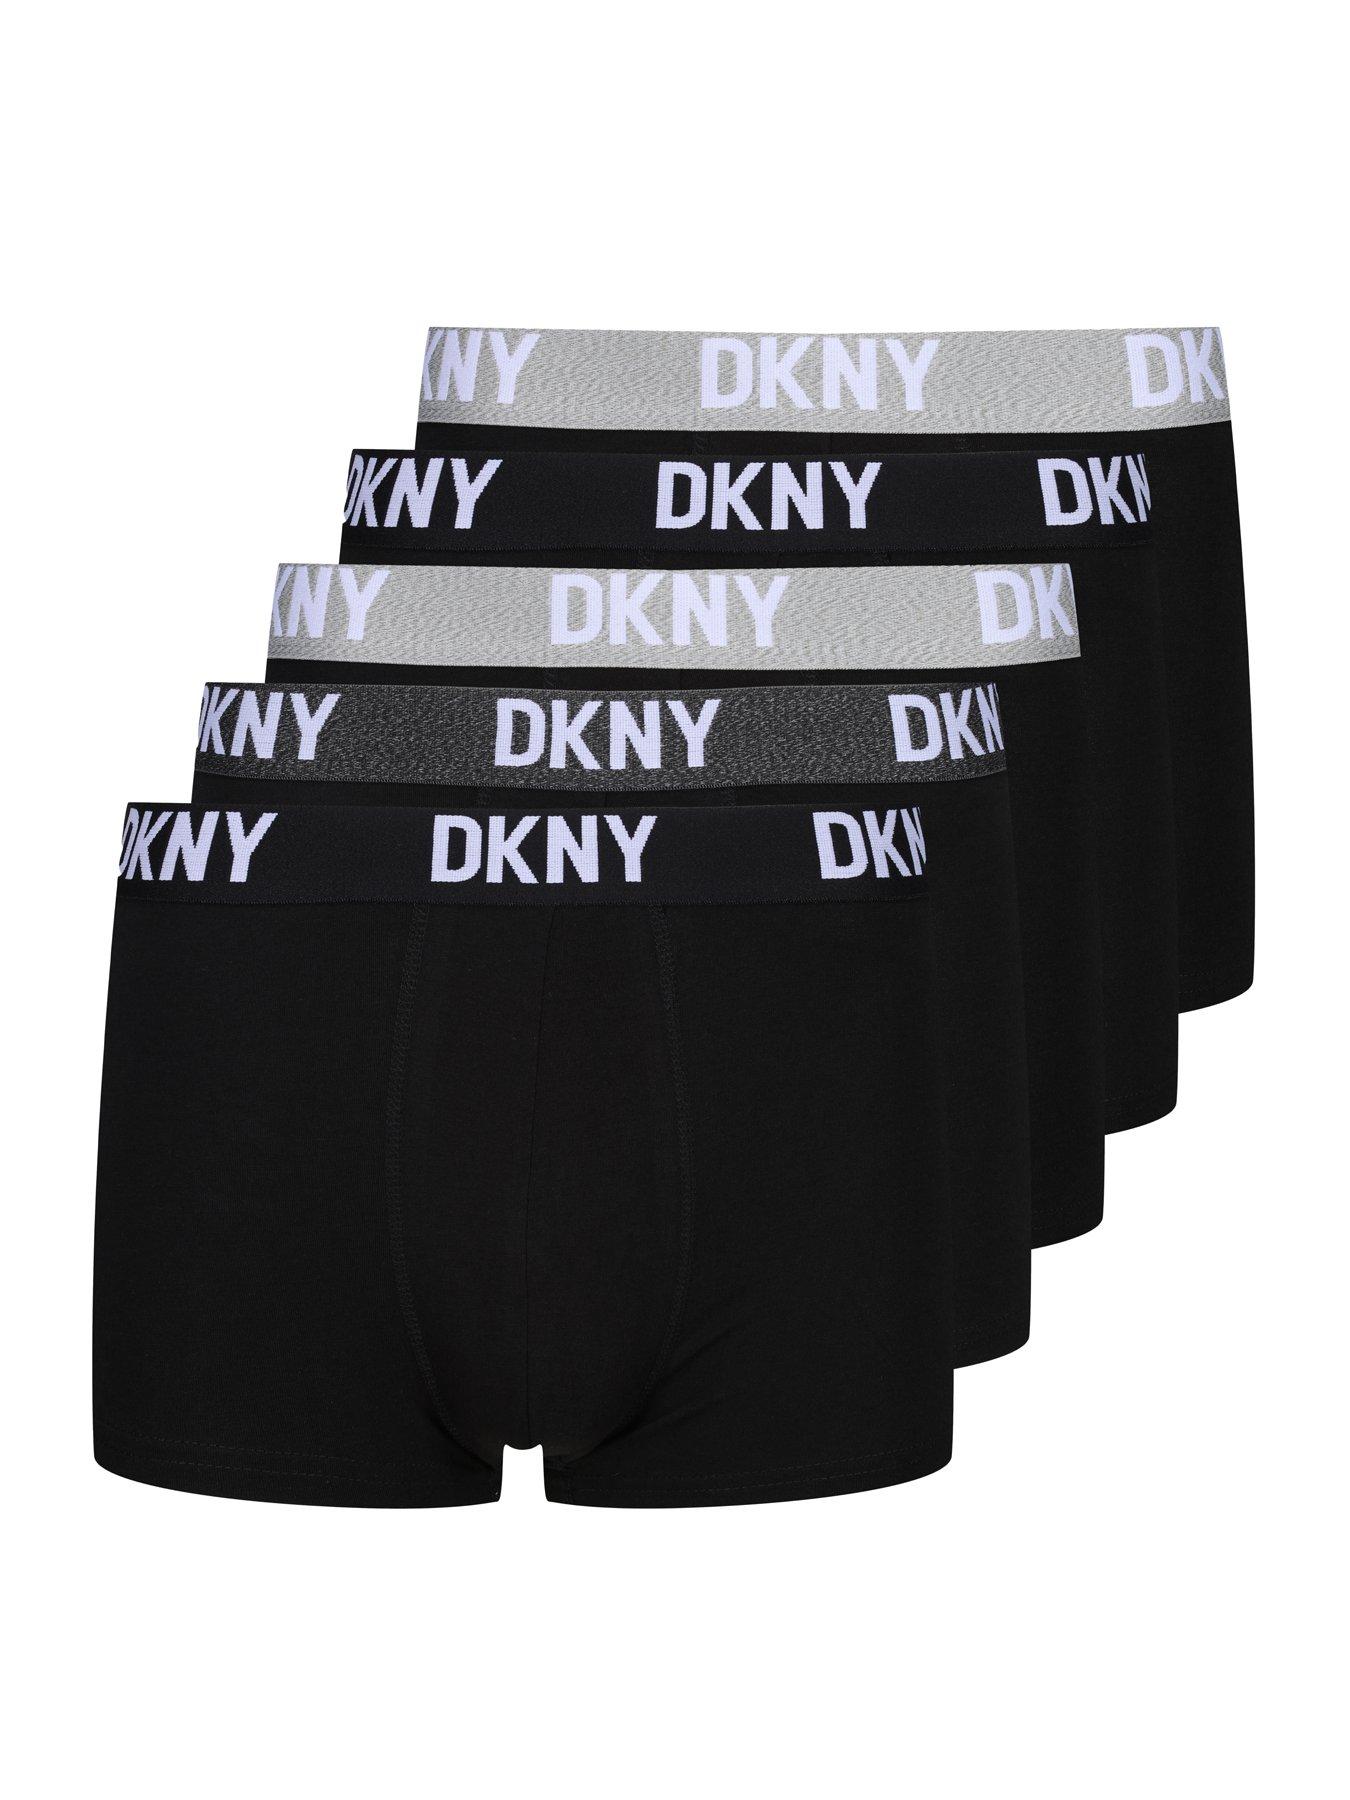 DKNY Mens Boxers in Black/Blue/Pattern, Super Soft 95% Cotton with  Metallic Elasticated Waistband